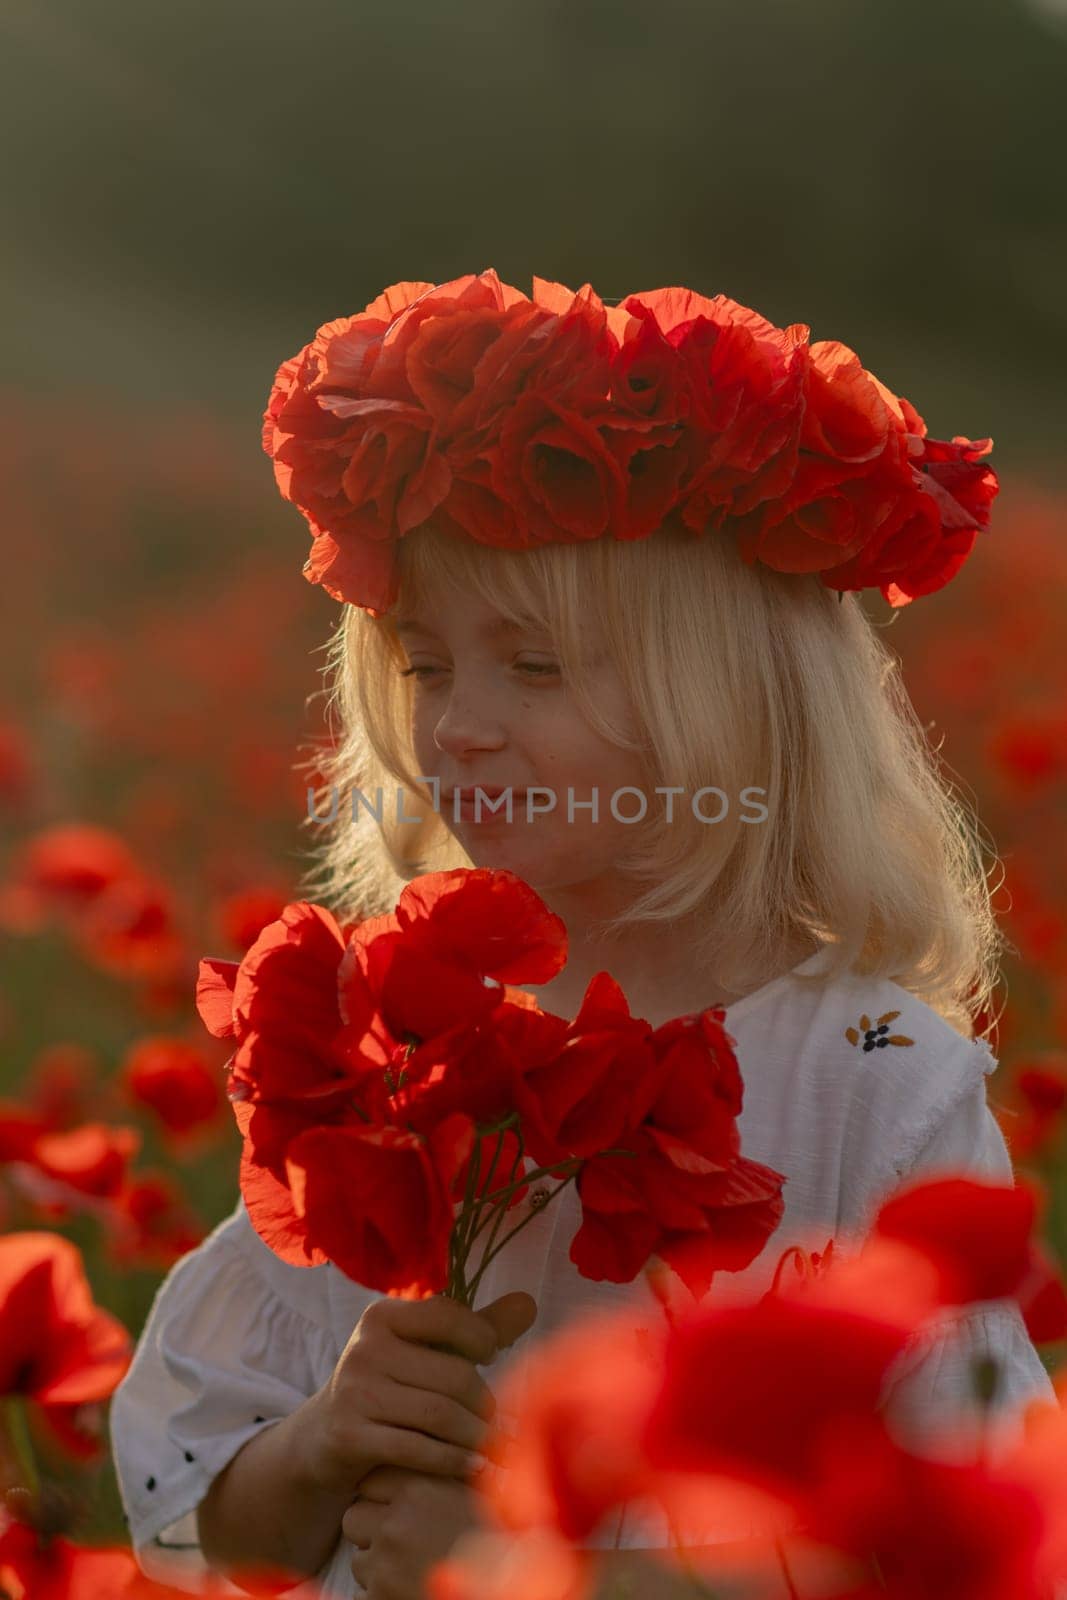 A young girl wearing a red flower crown is standing in a field of red poppies. She is holding a bouquet of red flowers in her hand